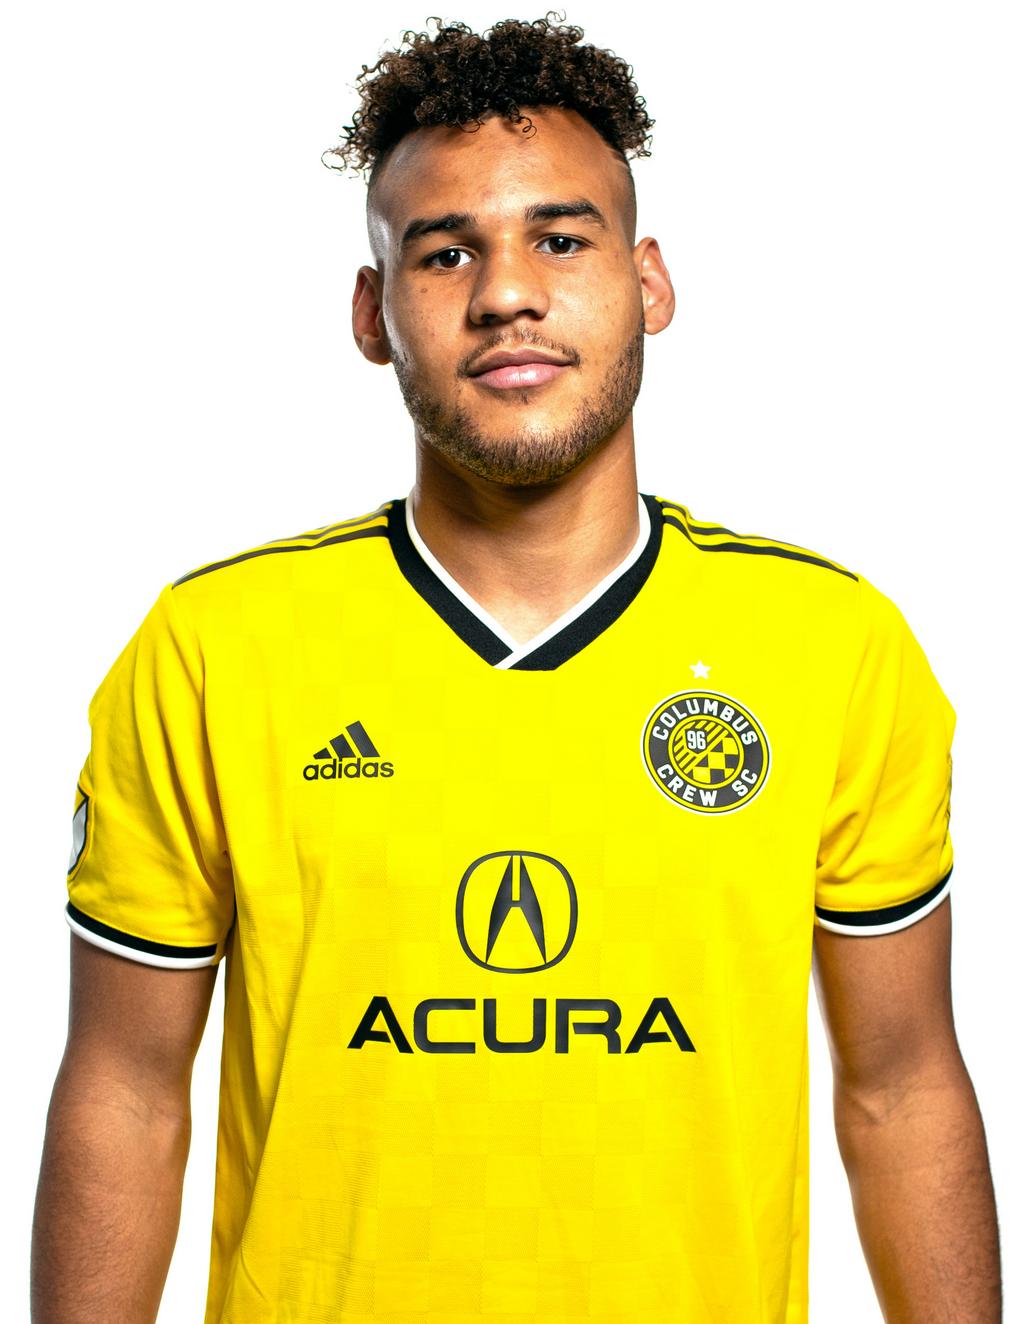 Here's how much Columbus Crew players earn - Columbus Business First